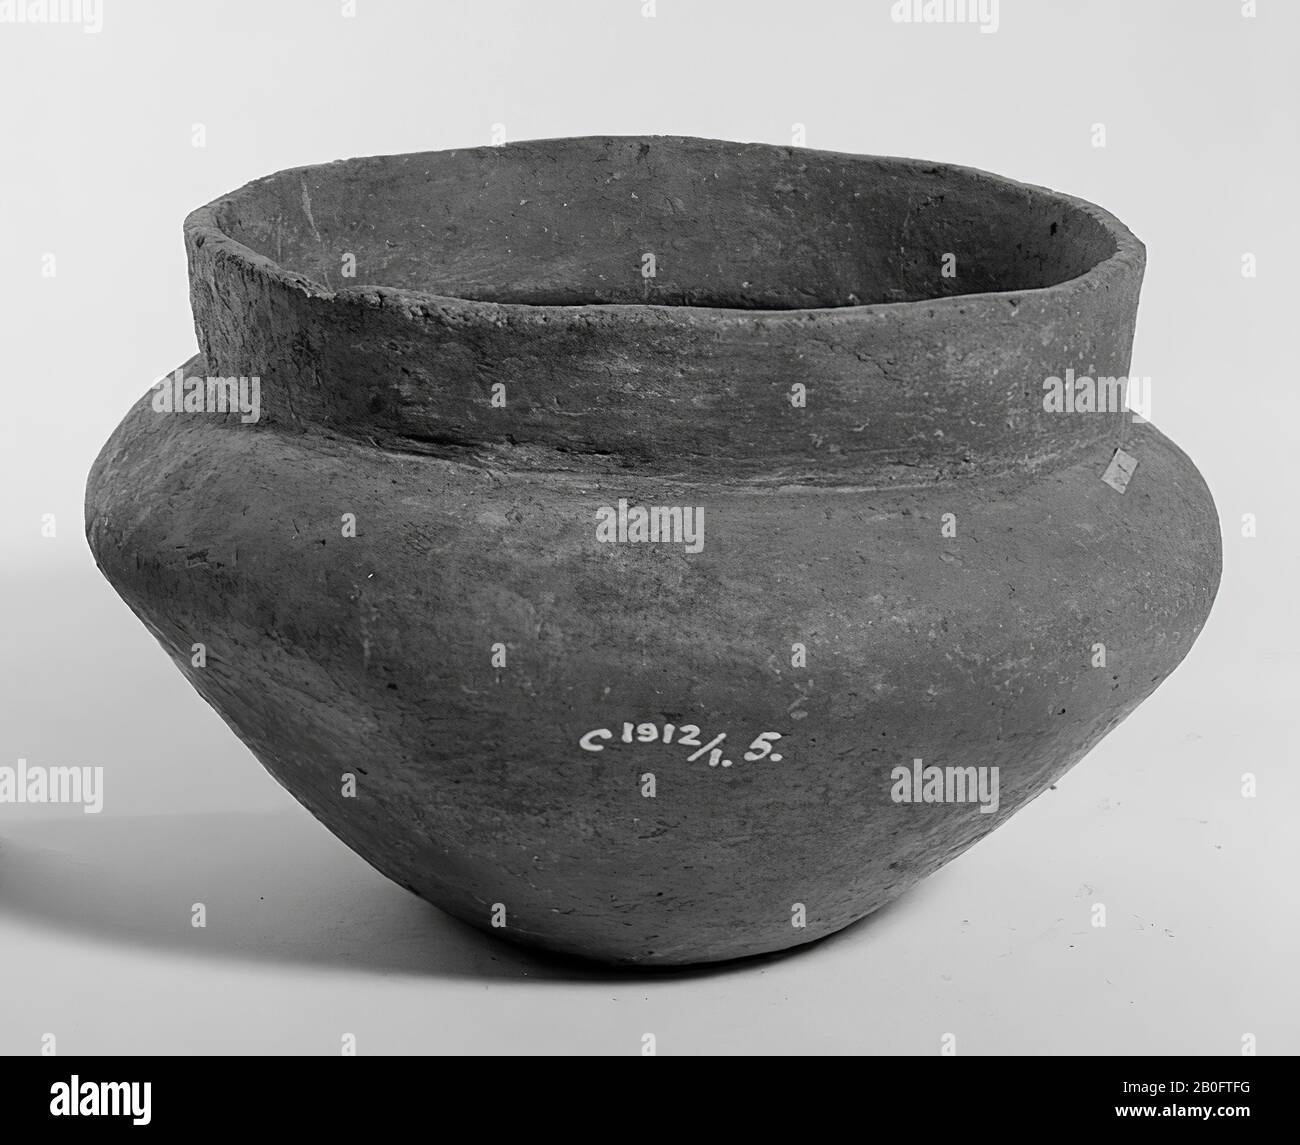 Flat broad-bellied urn of earthenware with raised neck. Contains cremated residues, urn, earthenware, h: 10.7 cm, diam: 16.8 cm, prehistory -1200 Stock Photo